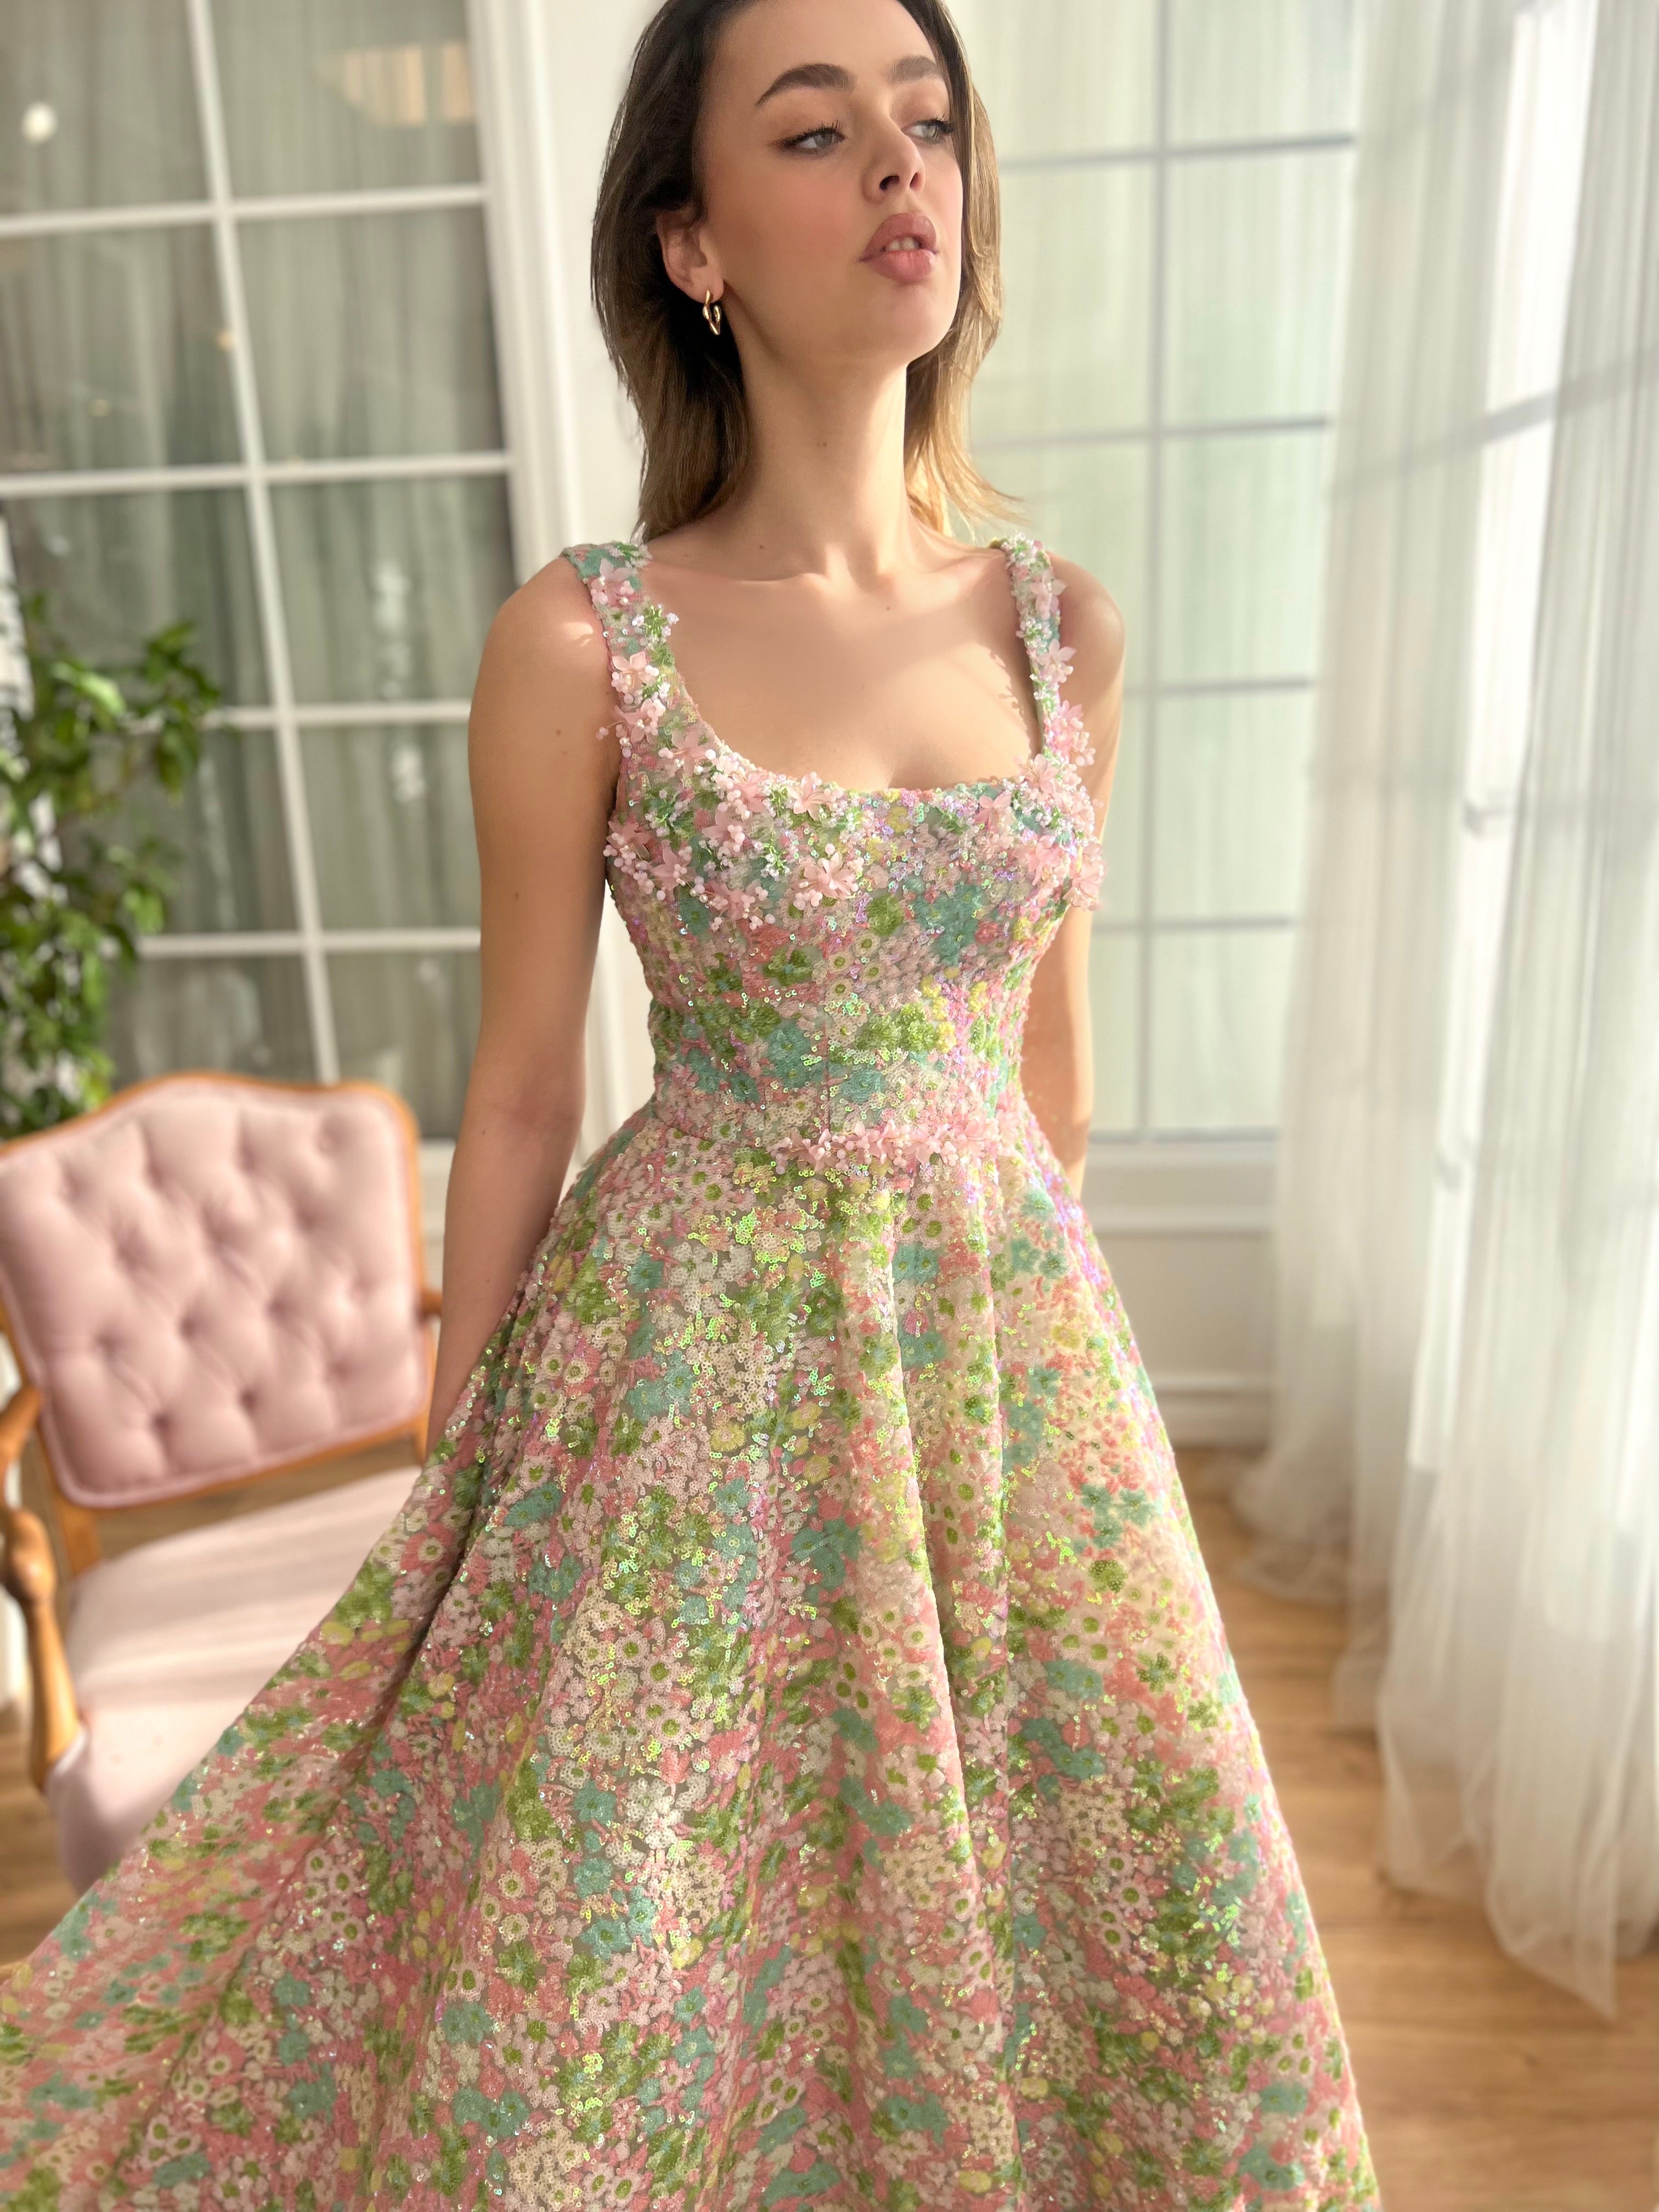 Colorful A-Line dress with embroidery and flowers and straps